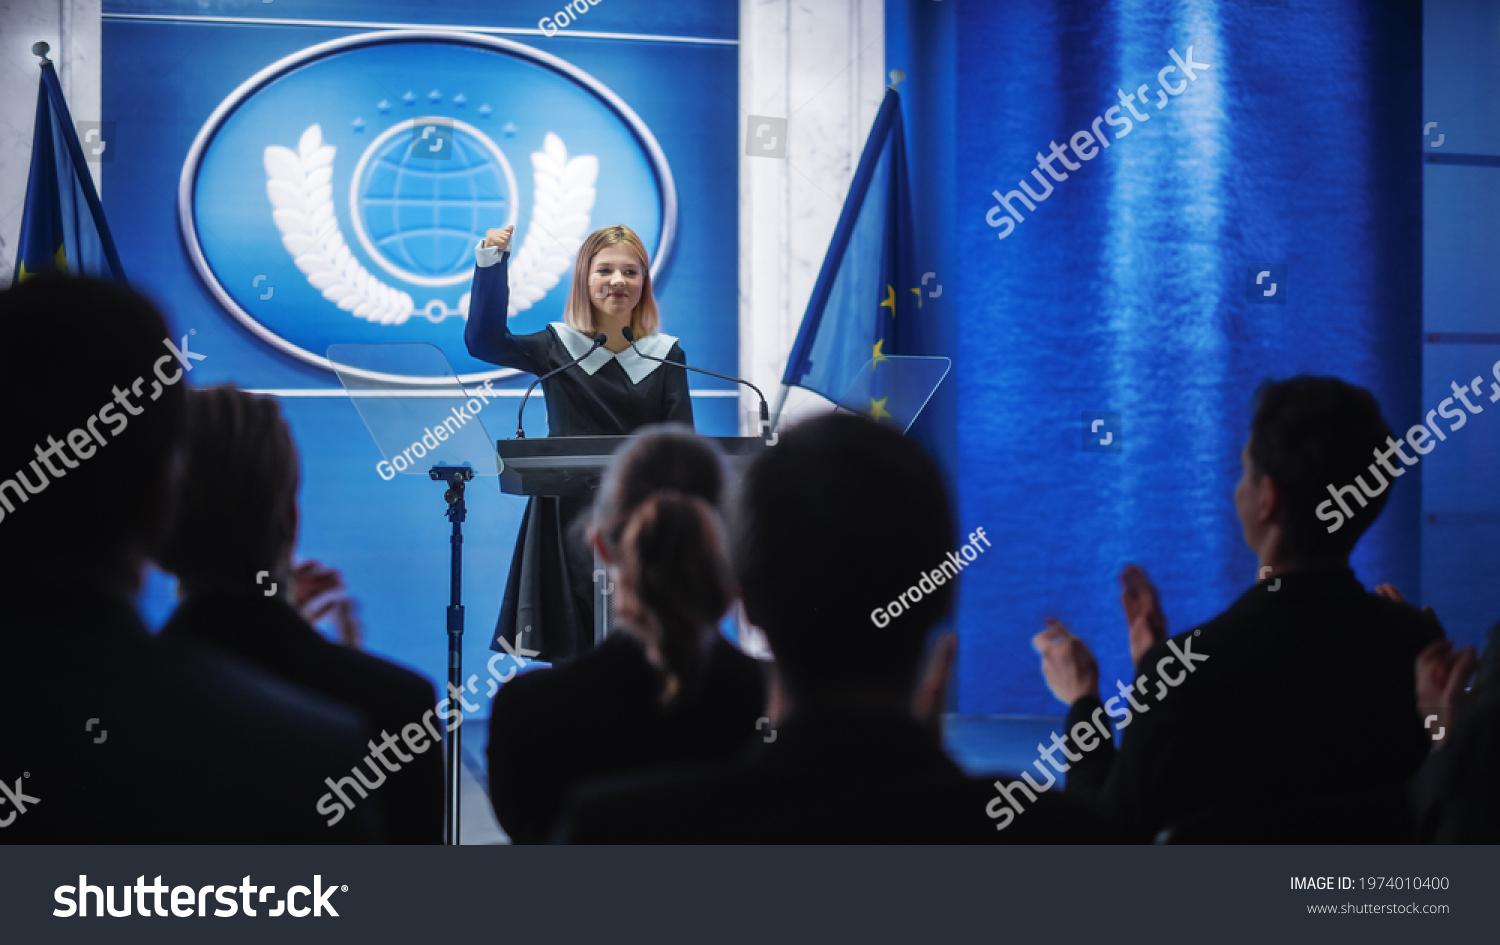 Young Girl Activist Delivering an Emotional and Powerful Speech at Press Conference in Government Building. Child Speaking to Congress at Summit Meeting. Backdrop with European Union Flags. #1974010400